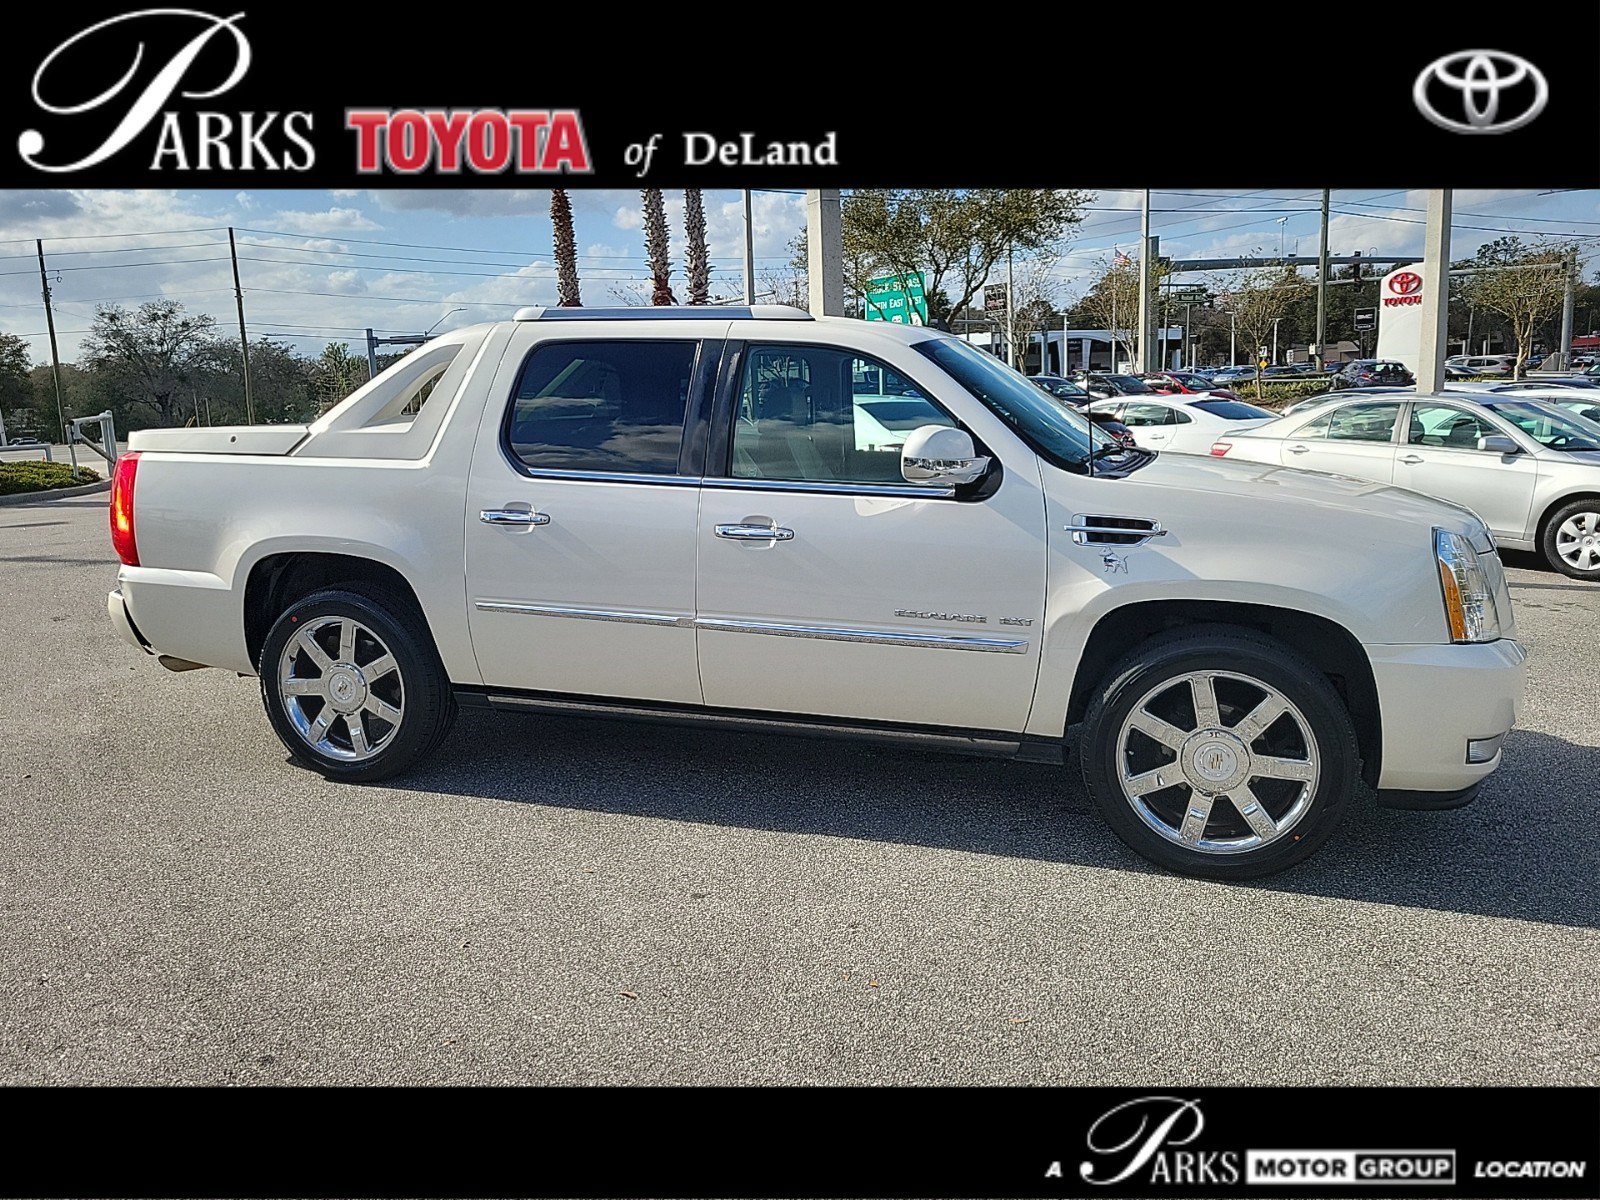 Used 2012 Cadillac Escalade EXT Trucks for Sale (Test Drive at Home) -  Kelley Blue Book